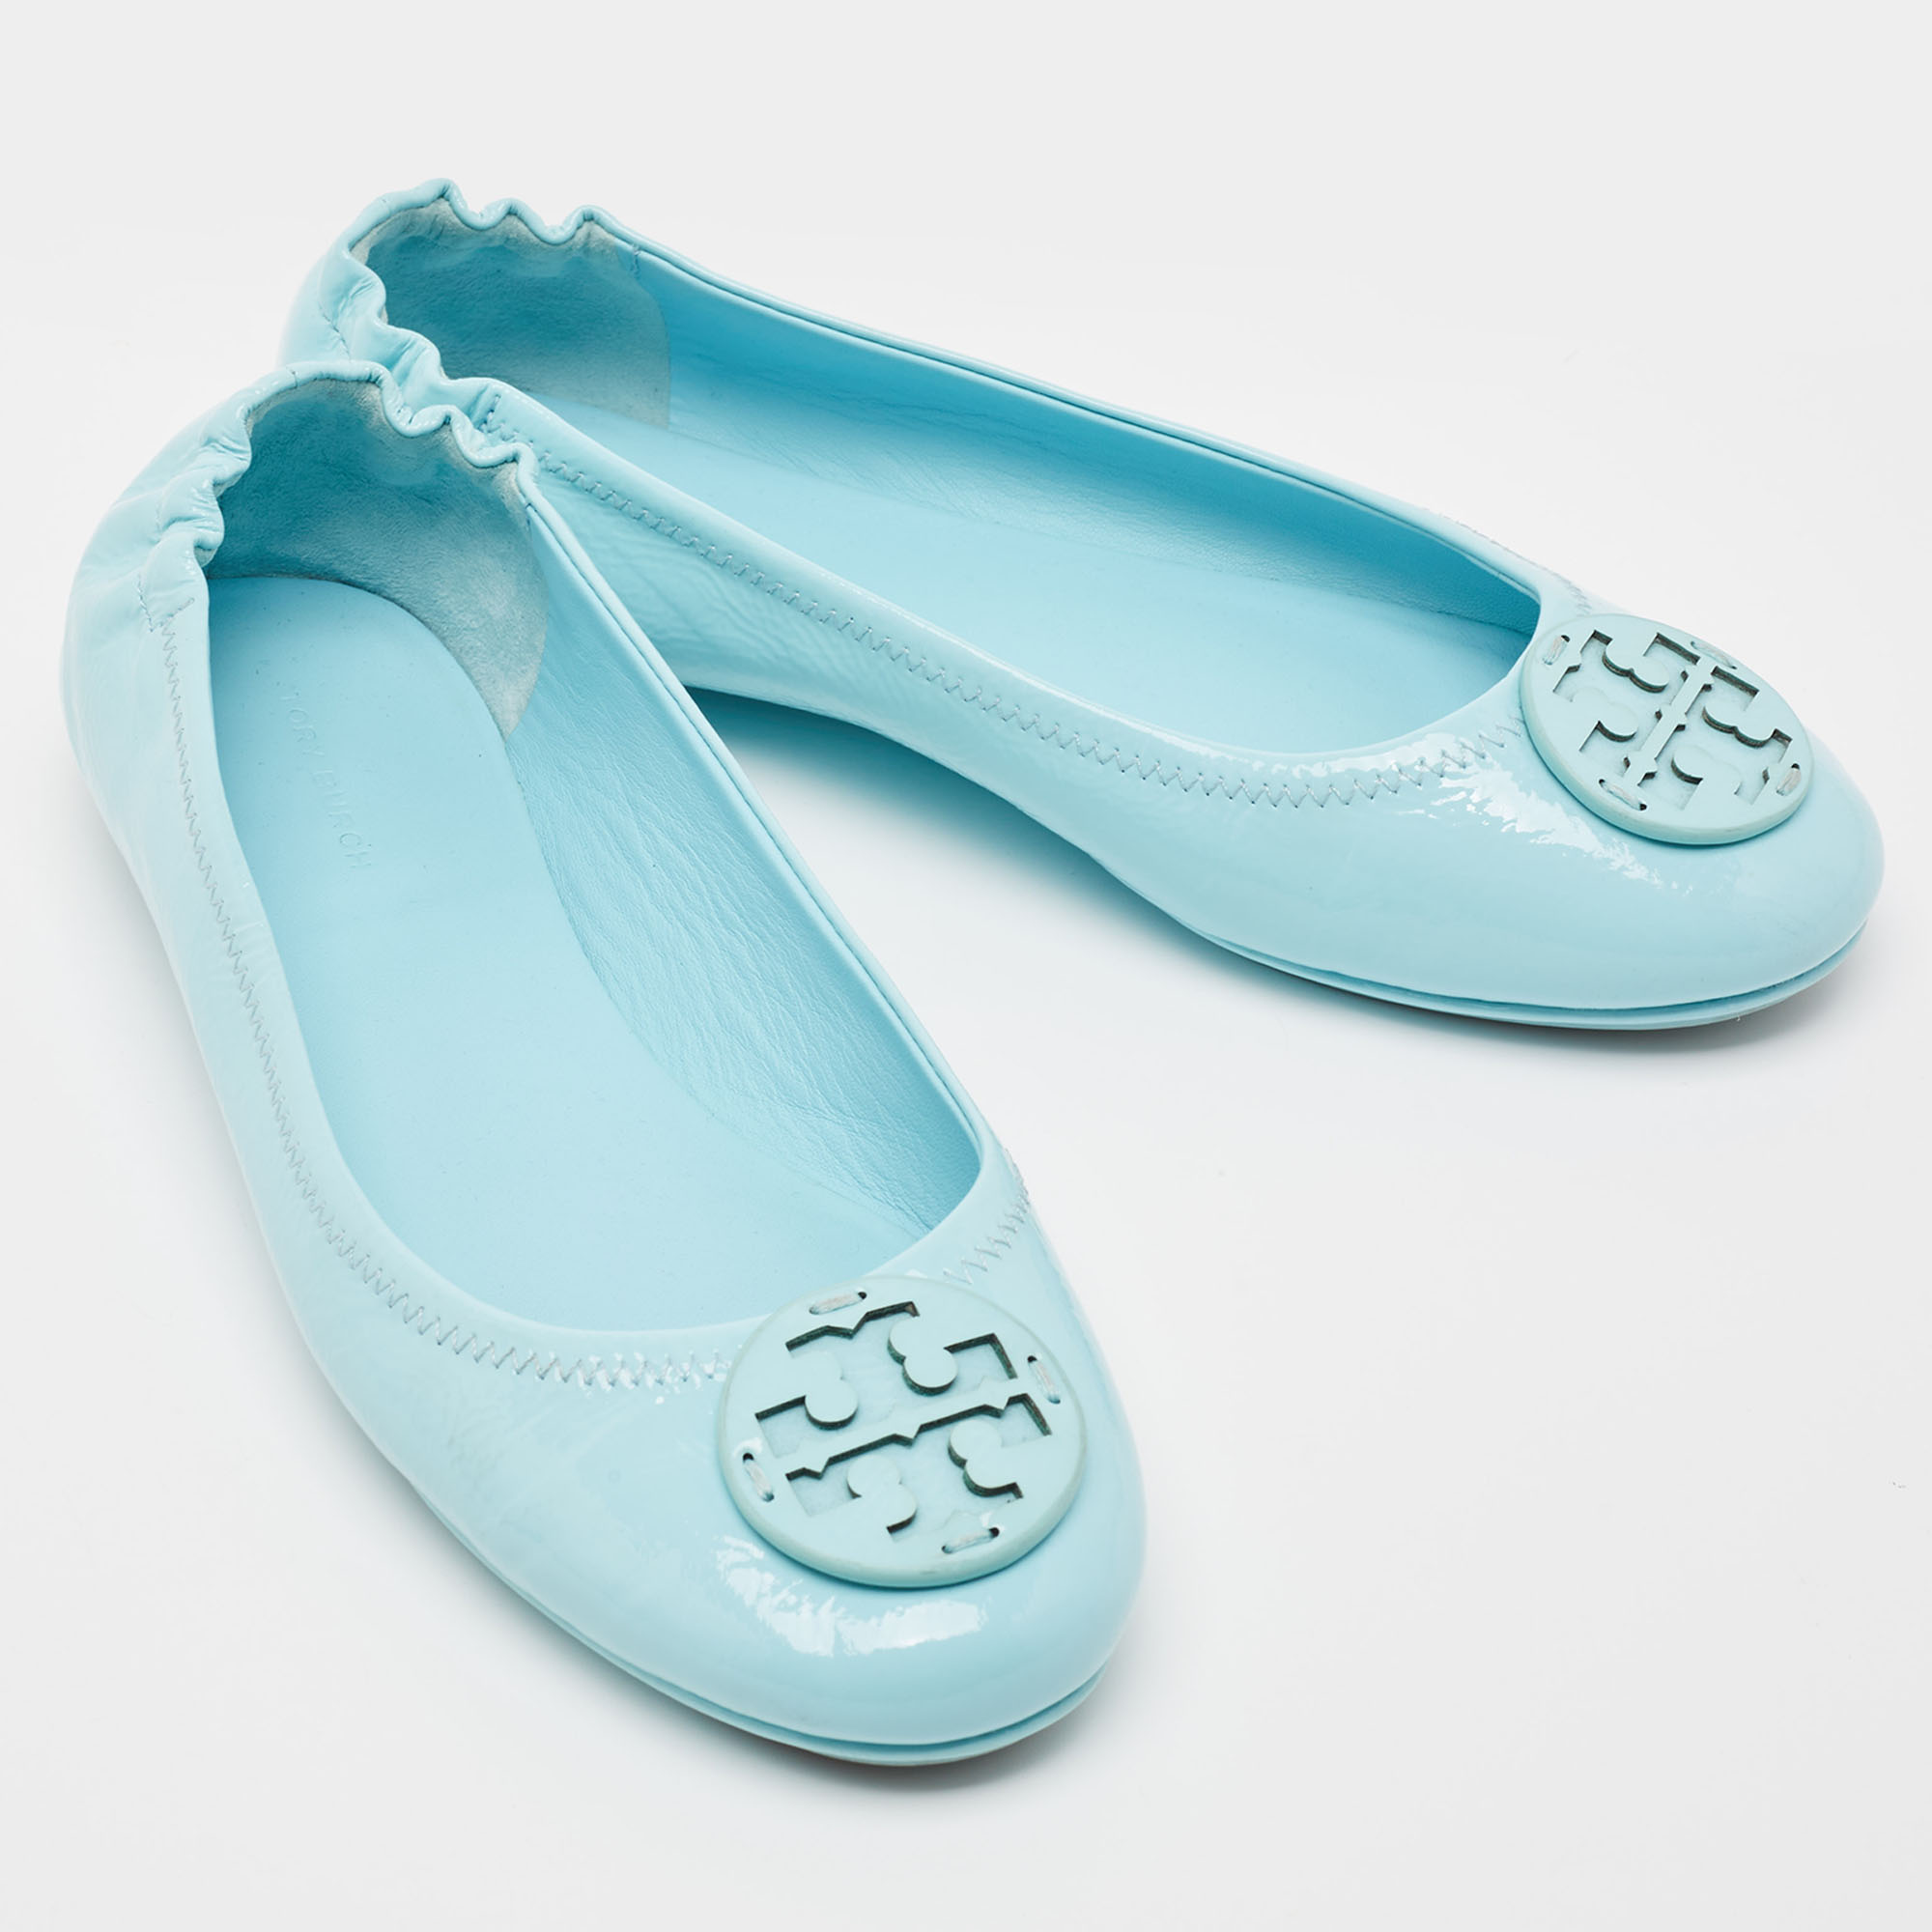 Tory Burch Blue Patent Leather Minnie Travel Ballet Flats Size 39